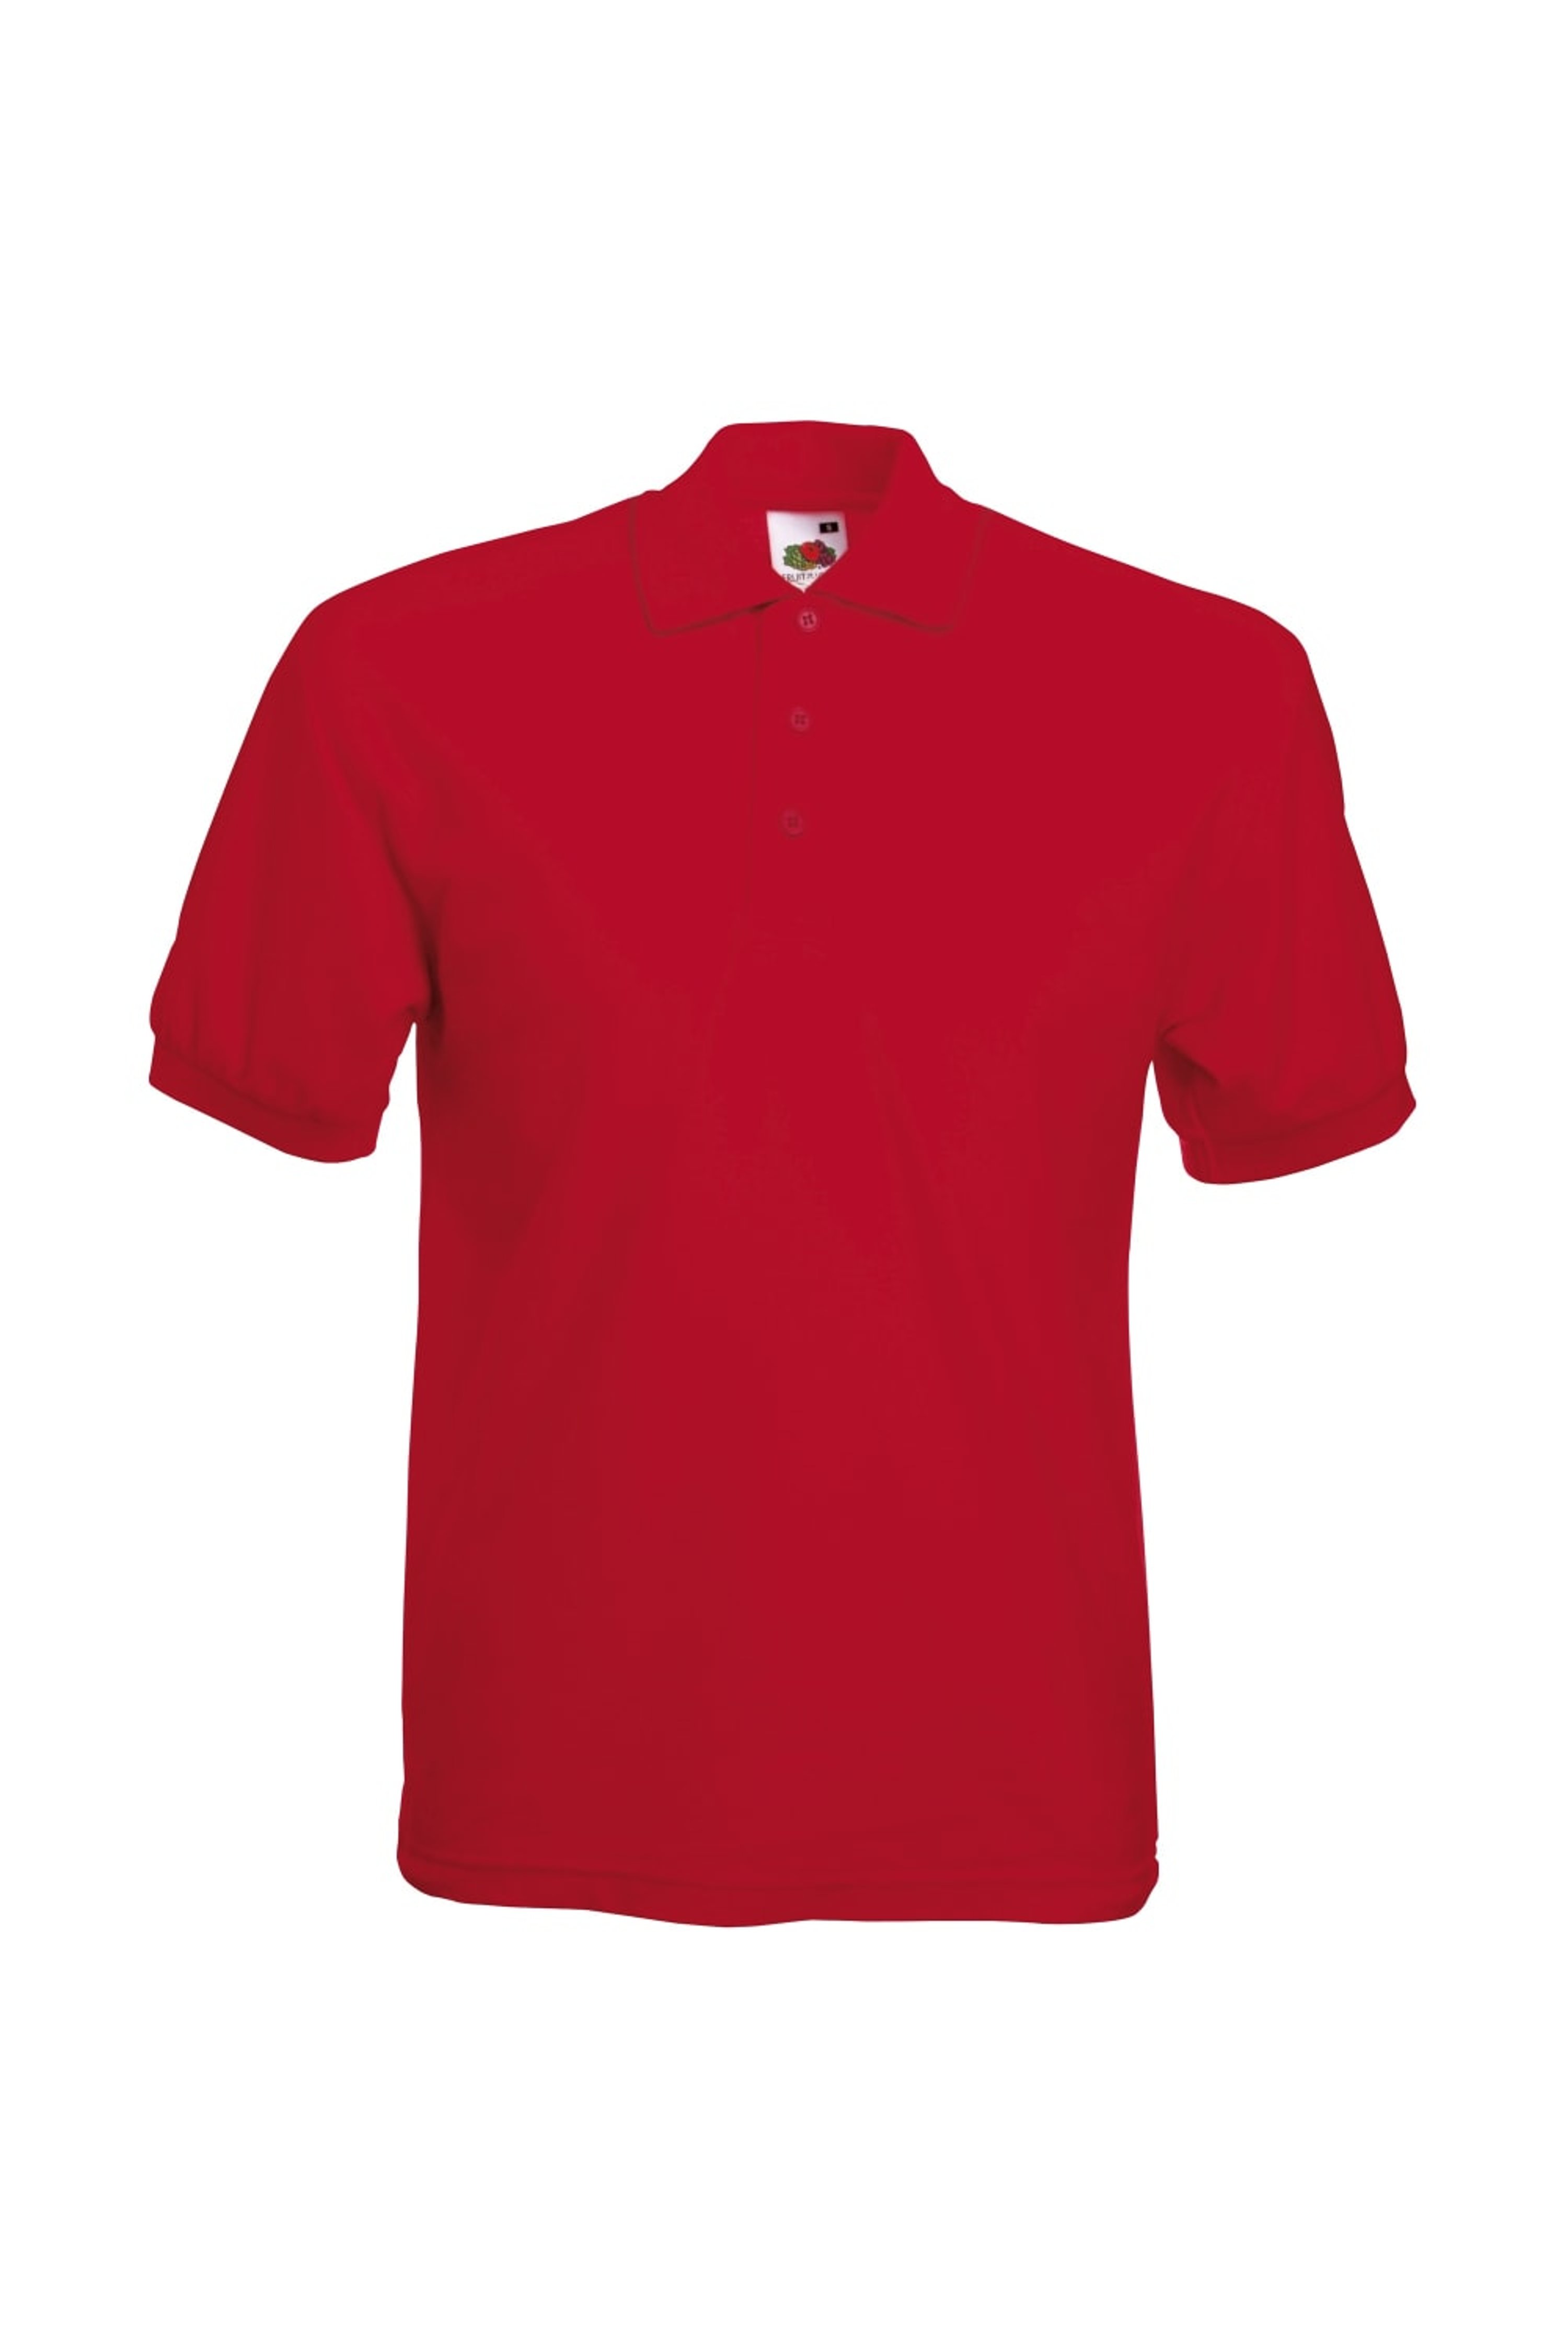 FRUIT OF THE LOOM FRUIT OF THE LOOM MENS 65/35 PIQUE SHORT SLEEVE POLO SHIRT (RED)